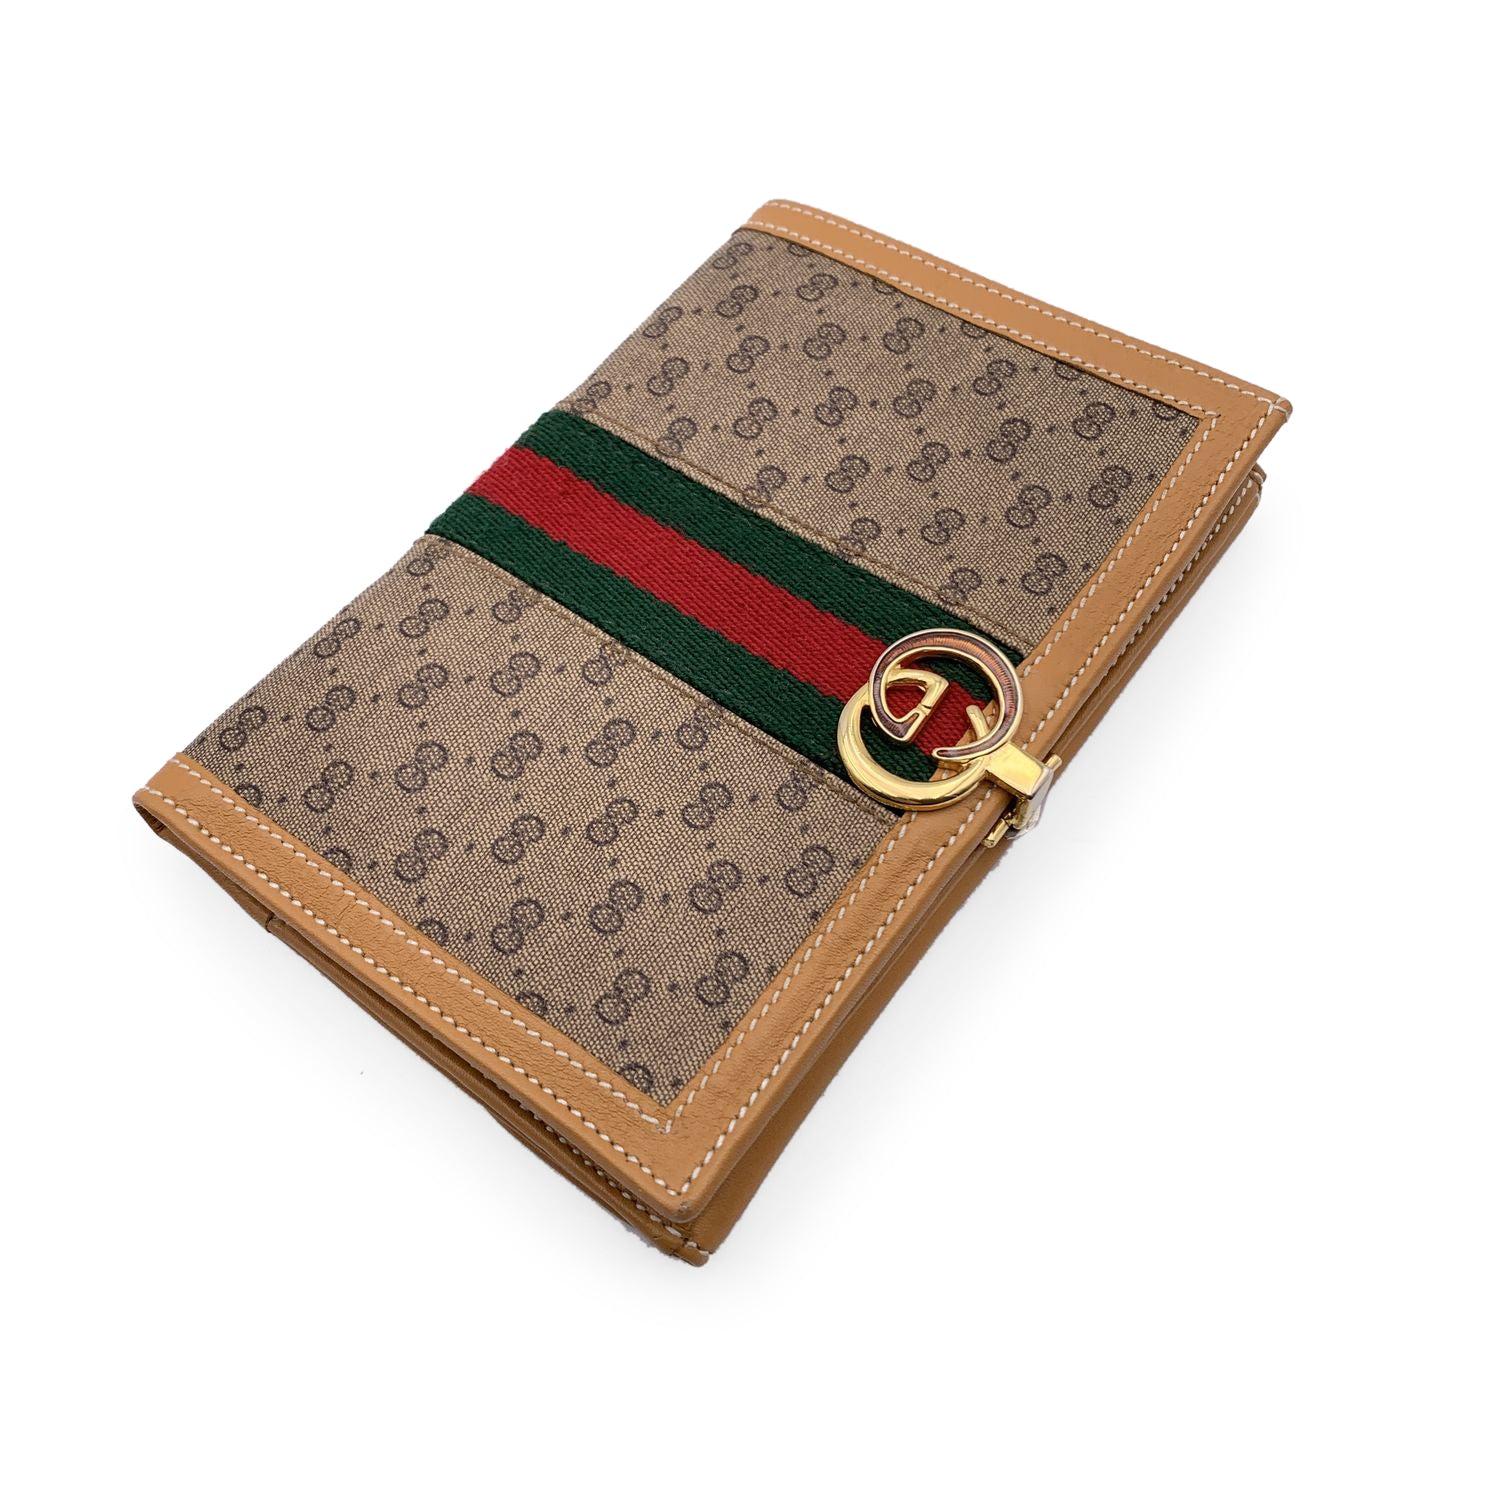 Vintage Gucci compact wallet, crafted in beige monogram canvas and leather with green/red/green stripes detailing. Gold metal enameled GG - GUCCI clasp closure. Back coin compartment with flap and snap button closure. It opens to a bill compartments